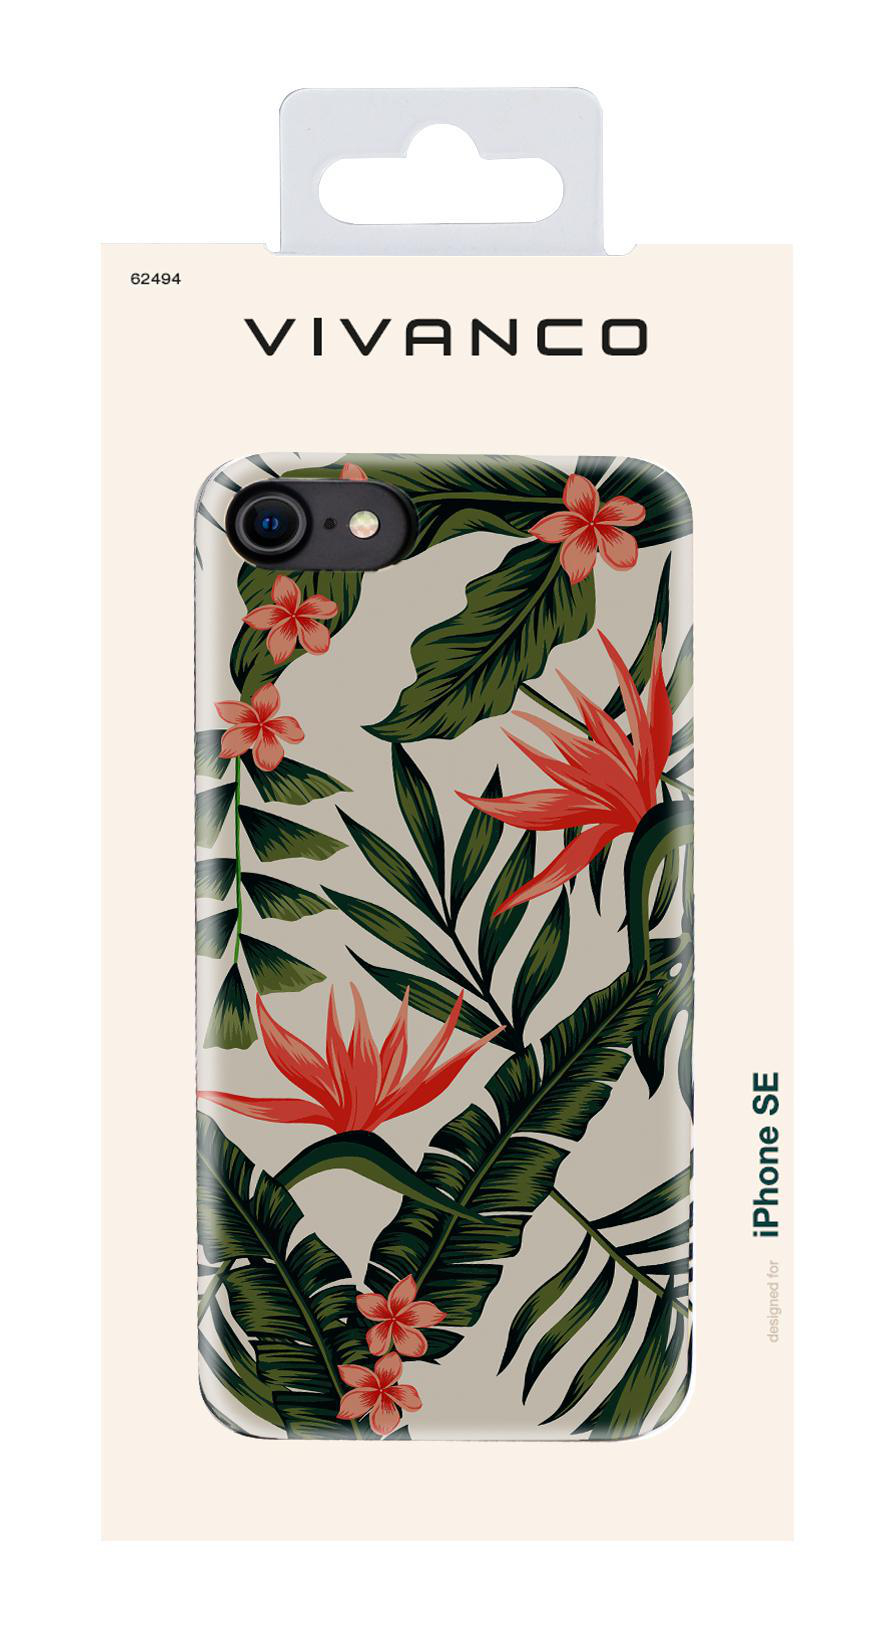 VIVANCO Special Edition Cover iPhone iPhone Apple, 7, Backcover, SE Mehrfarbig \